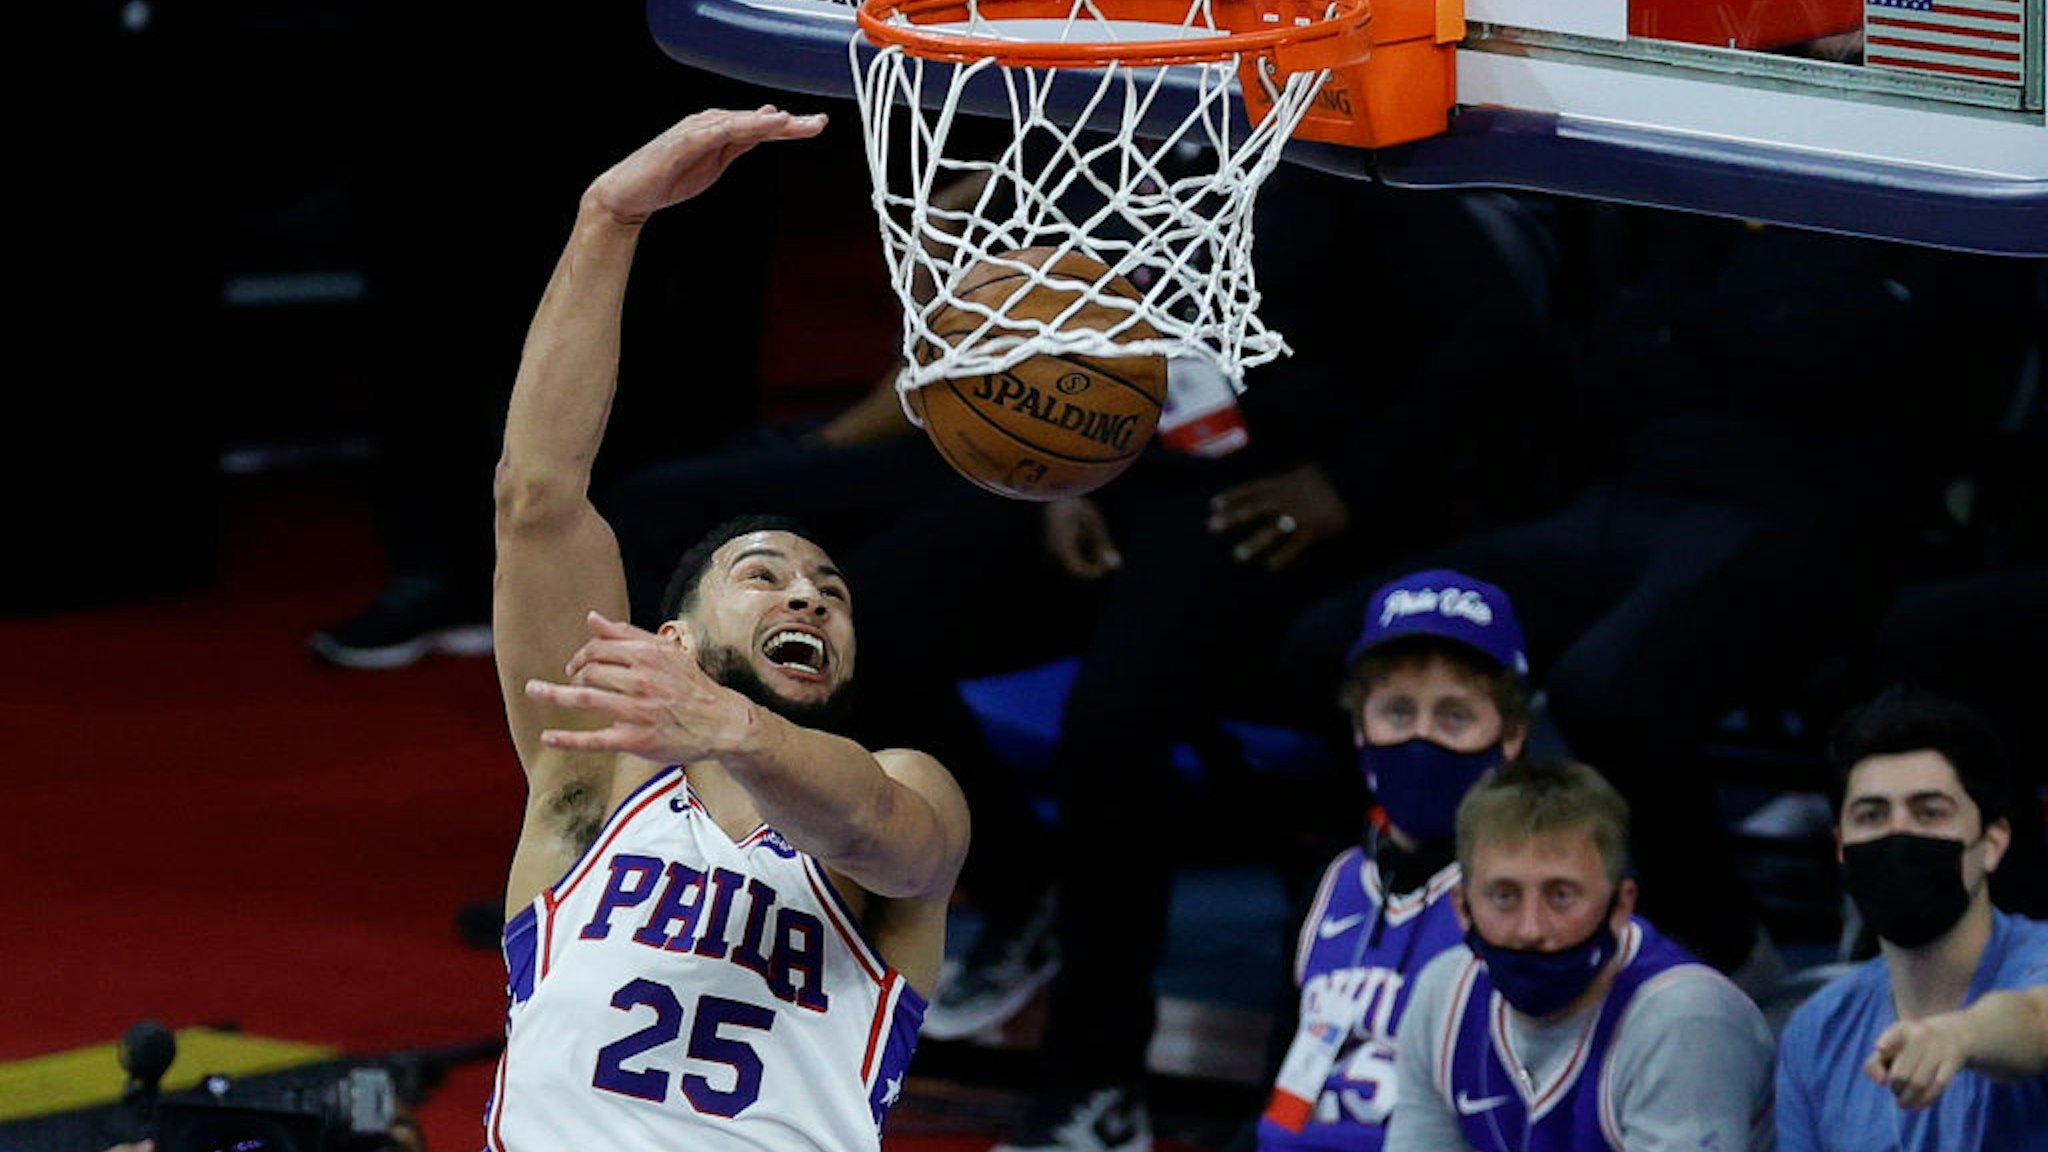 PHILADELPHIA, PENNSYLVANIA - JUNE 20: Ben Simmons #25 of the Philadelphia 76ers dunks during the third quarter against the Atlanta Hawks during Game Seven of the Eastern Conference Semifinals at Wells Fargo Center on June 20, 2021 in Philadelphia, Pennsylvania. NOTE TO USER: User expressly acknowledges and agrees that, by downloading and or using this photograph, User is consenting to the terms and conditions of the Getty Images License Agreement. (Photo by Tim Nwachukwu/Getty Images)